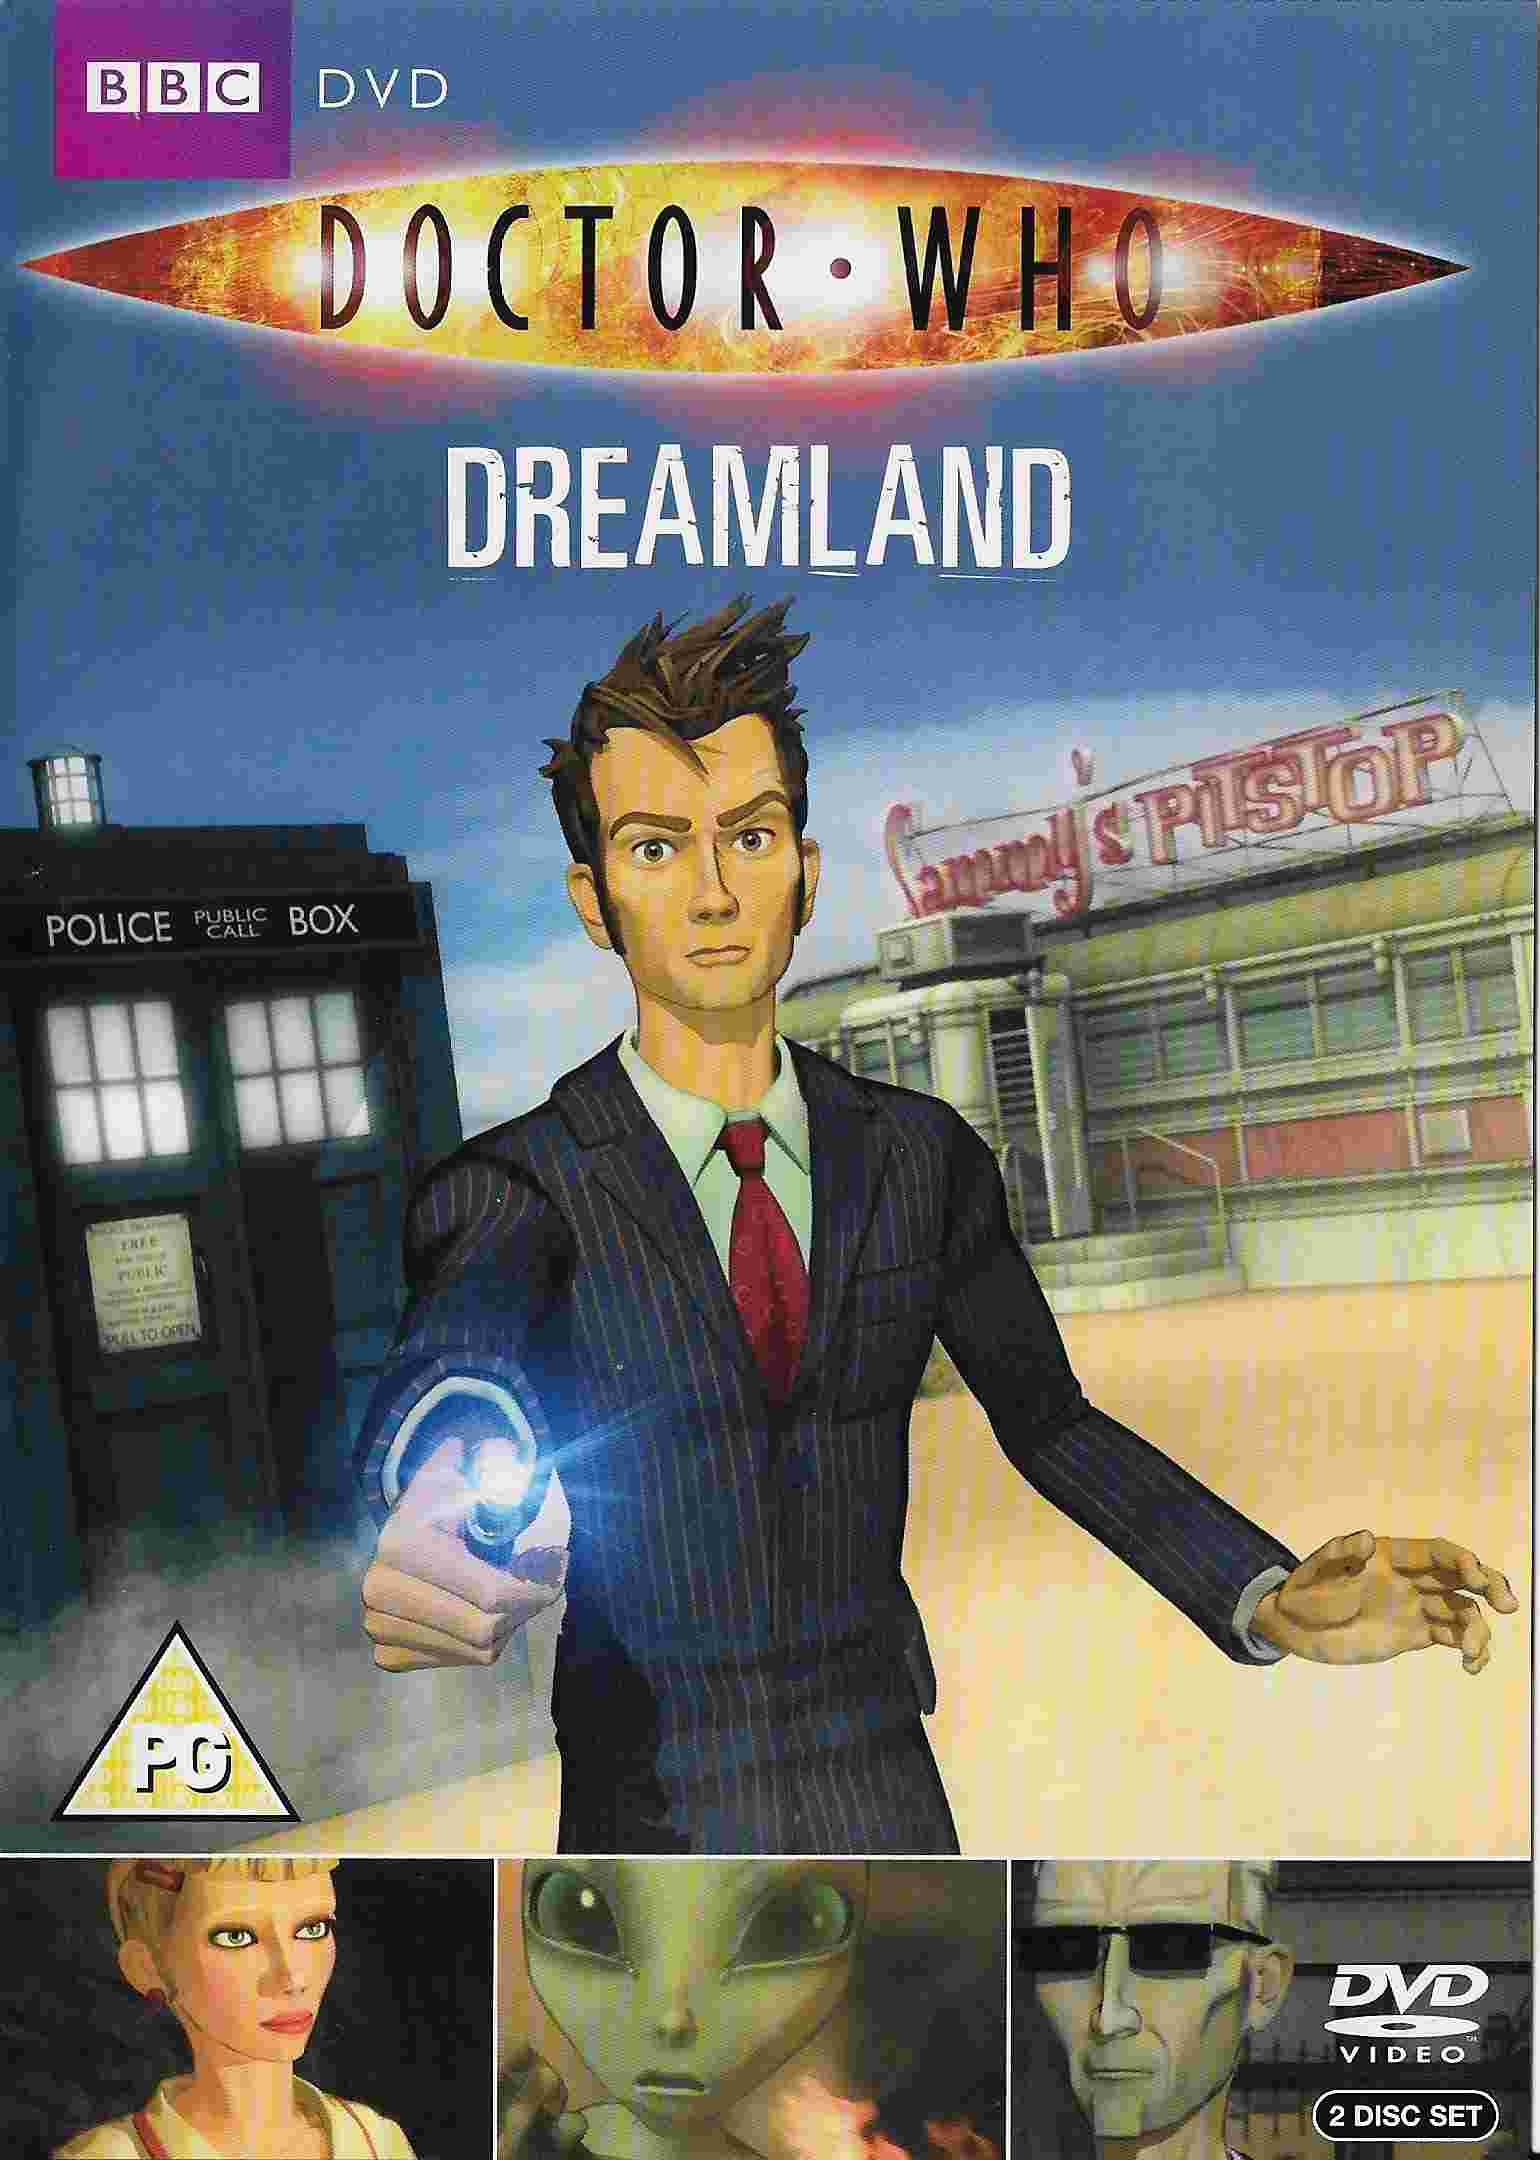 Picture of BBCDVD 3163 Doctor Who - Dreamland by artist Phil Ford from the BBC records and Tapes library